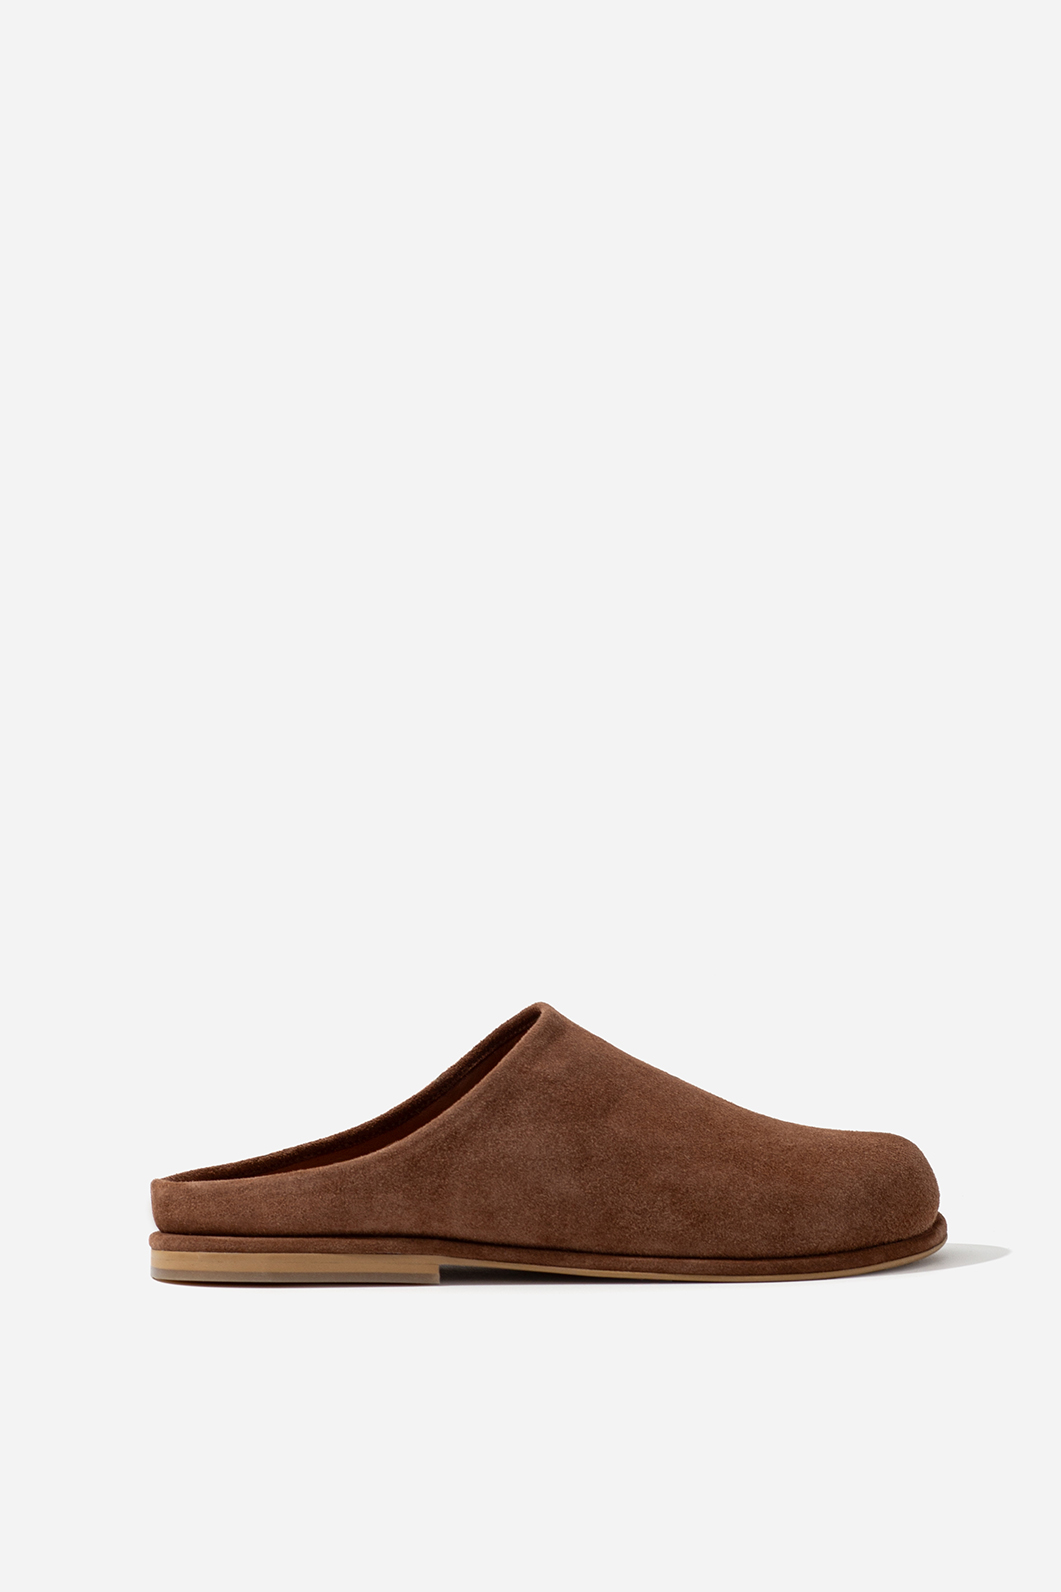 Claire brown suede mules